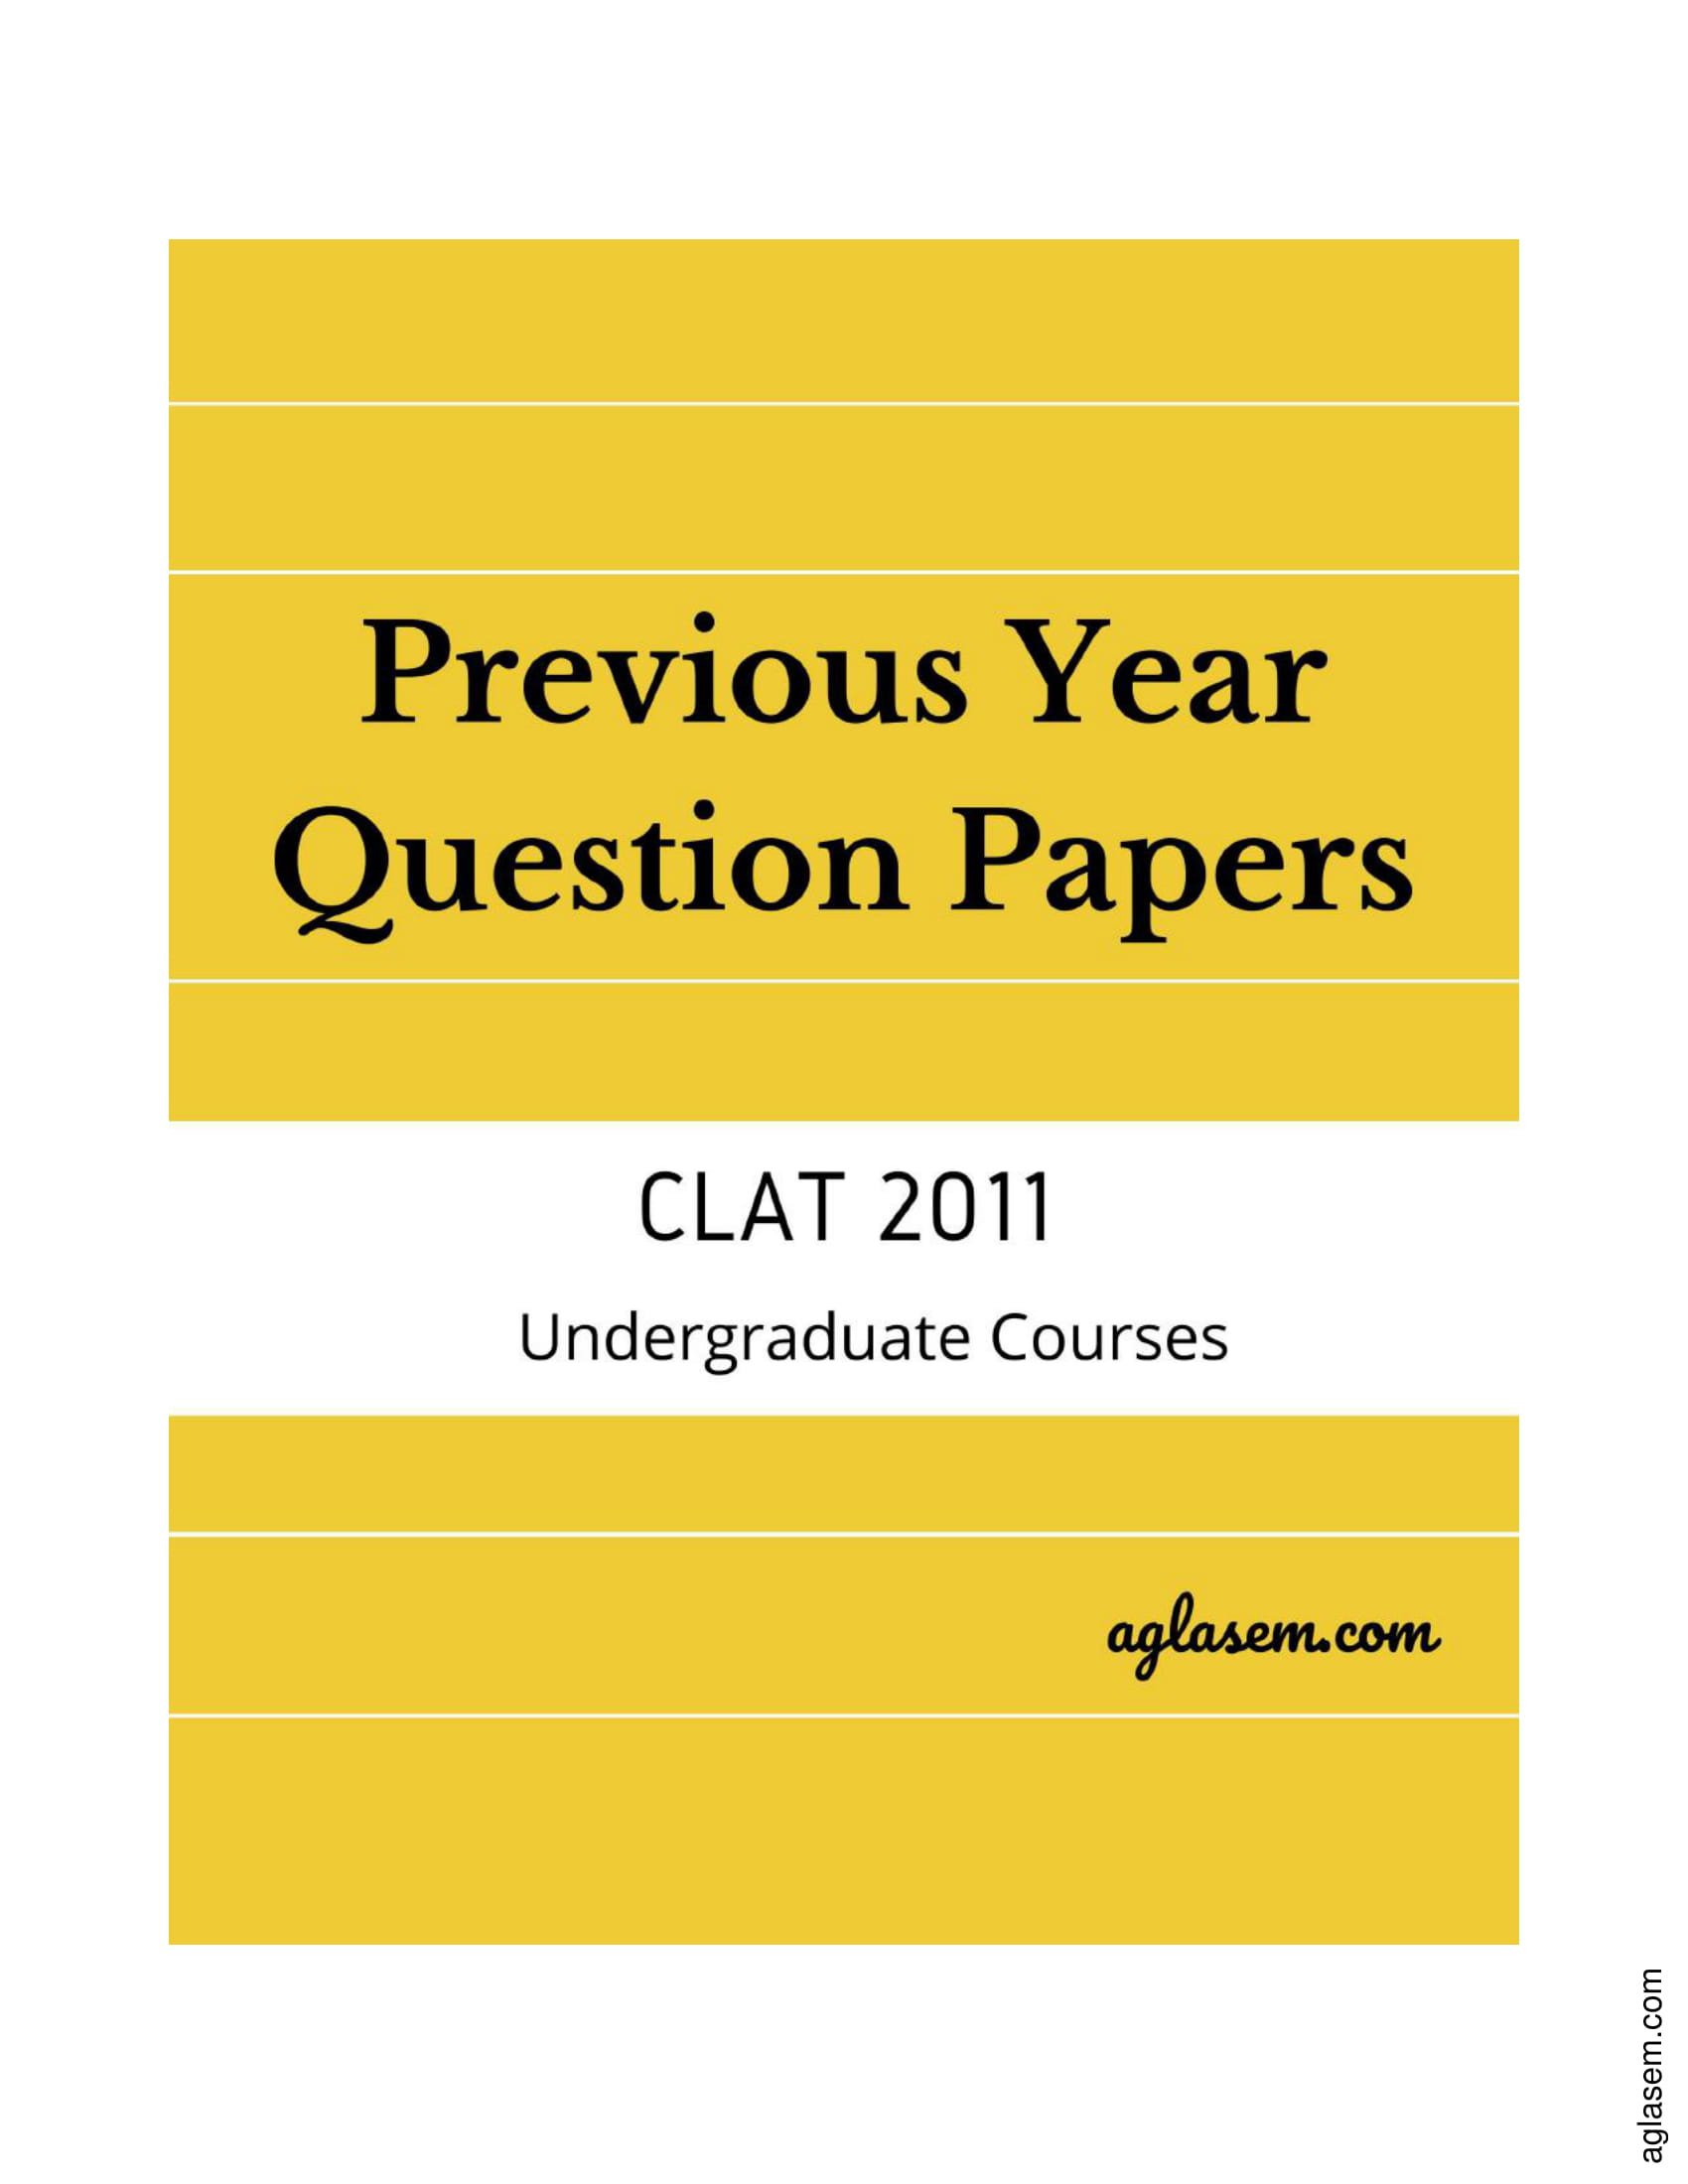 CLAT 2011 Question Paper - Page 1